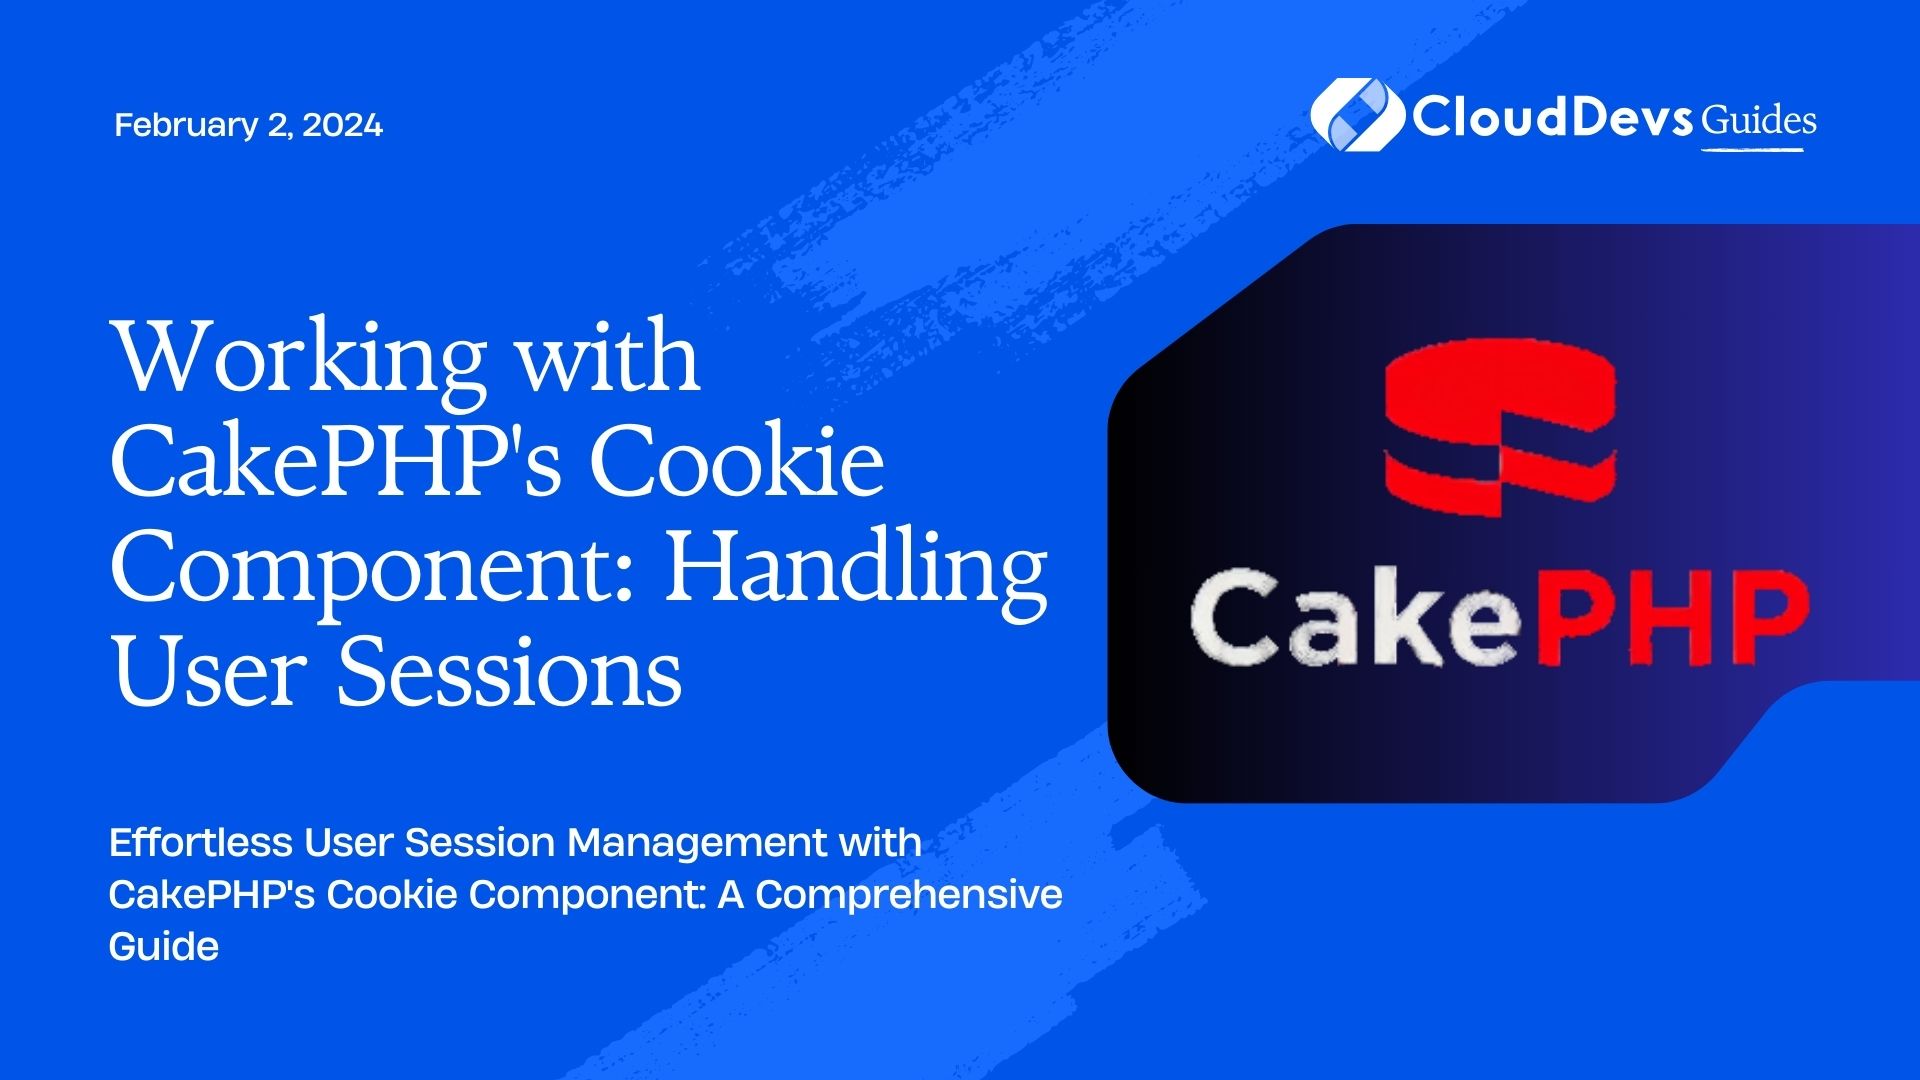 Working with CakePHP's Cookie Component: Handling User Sessions